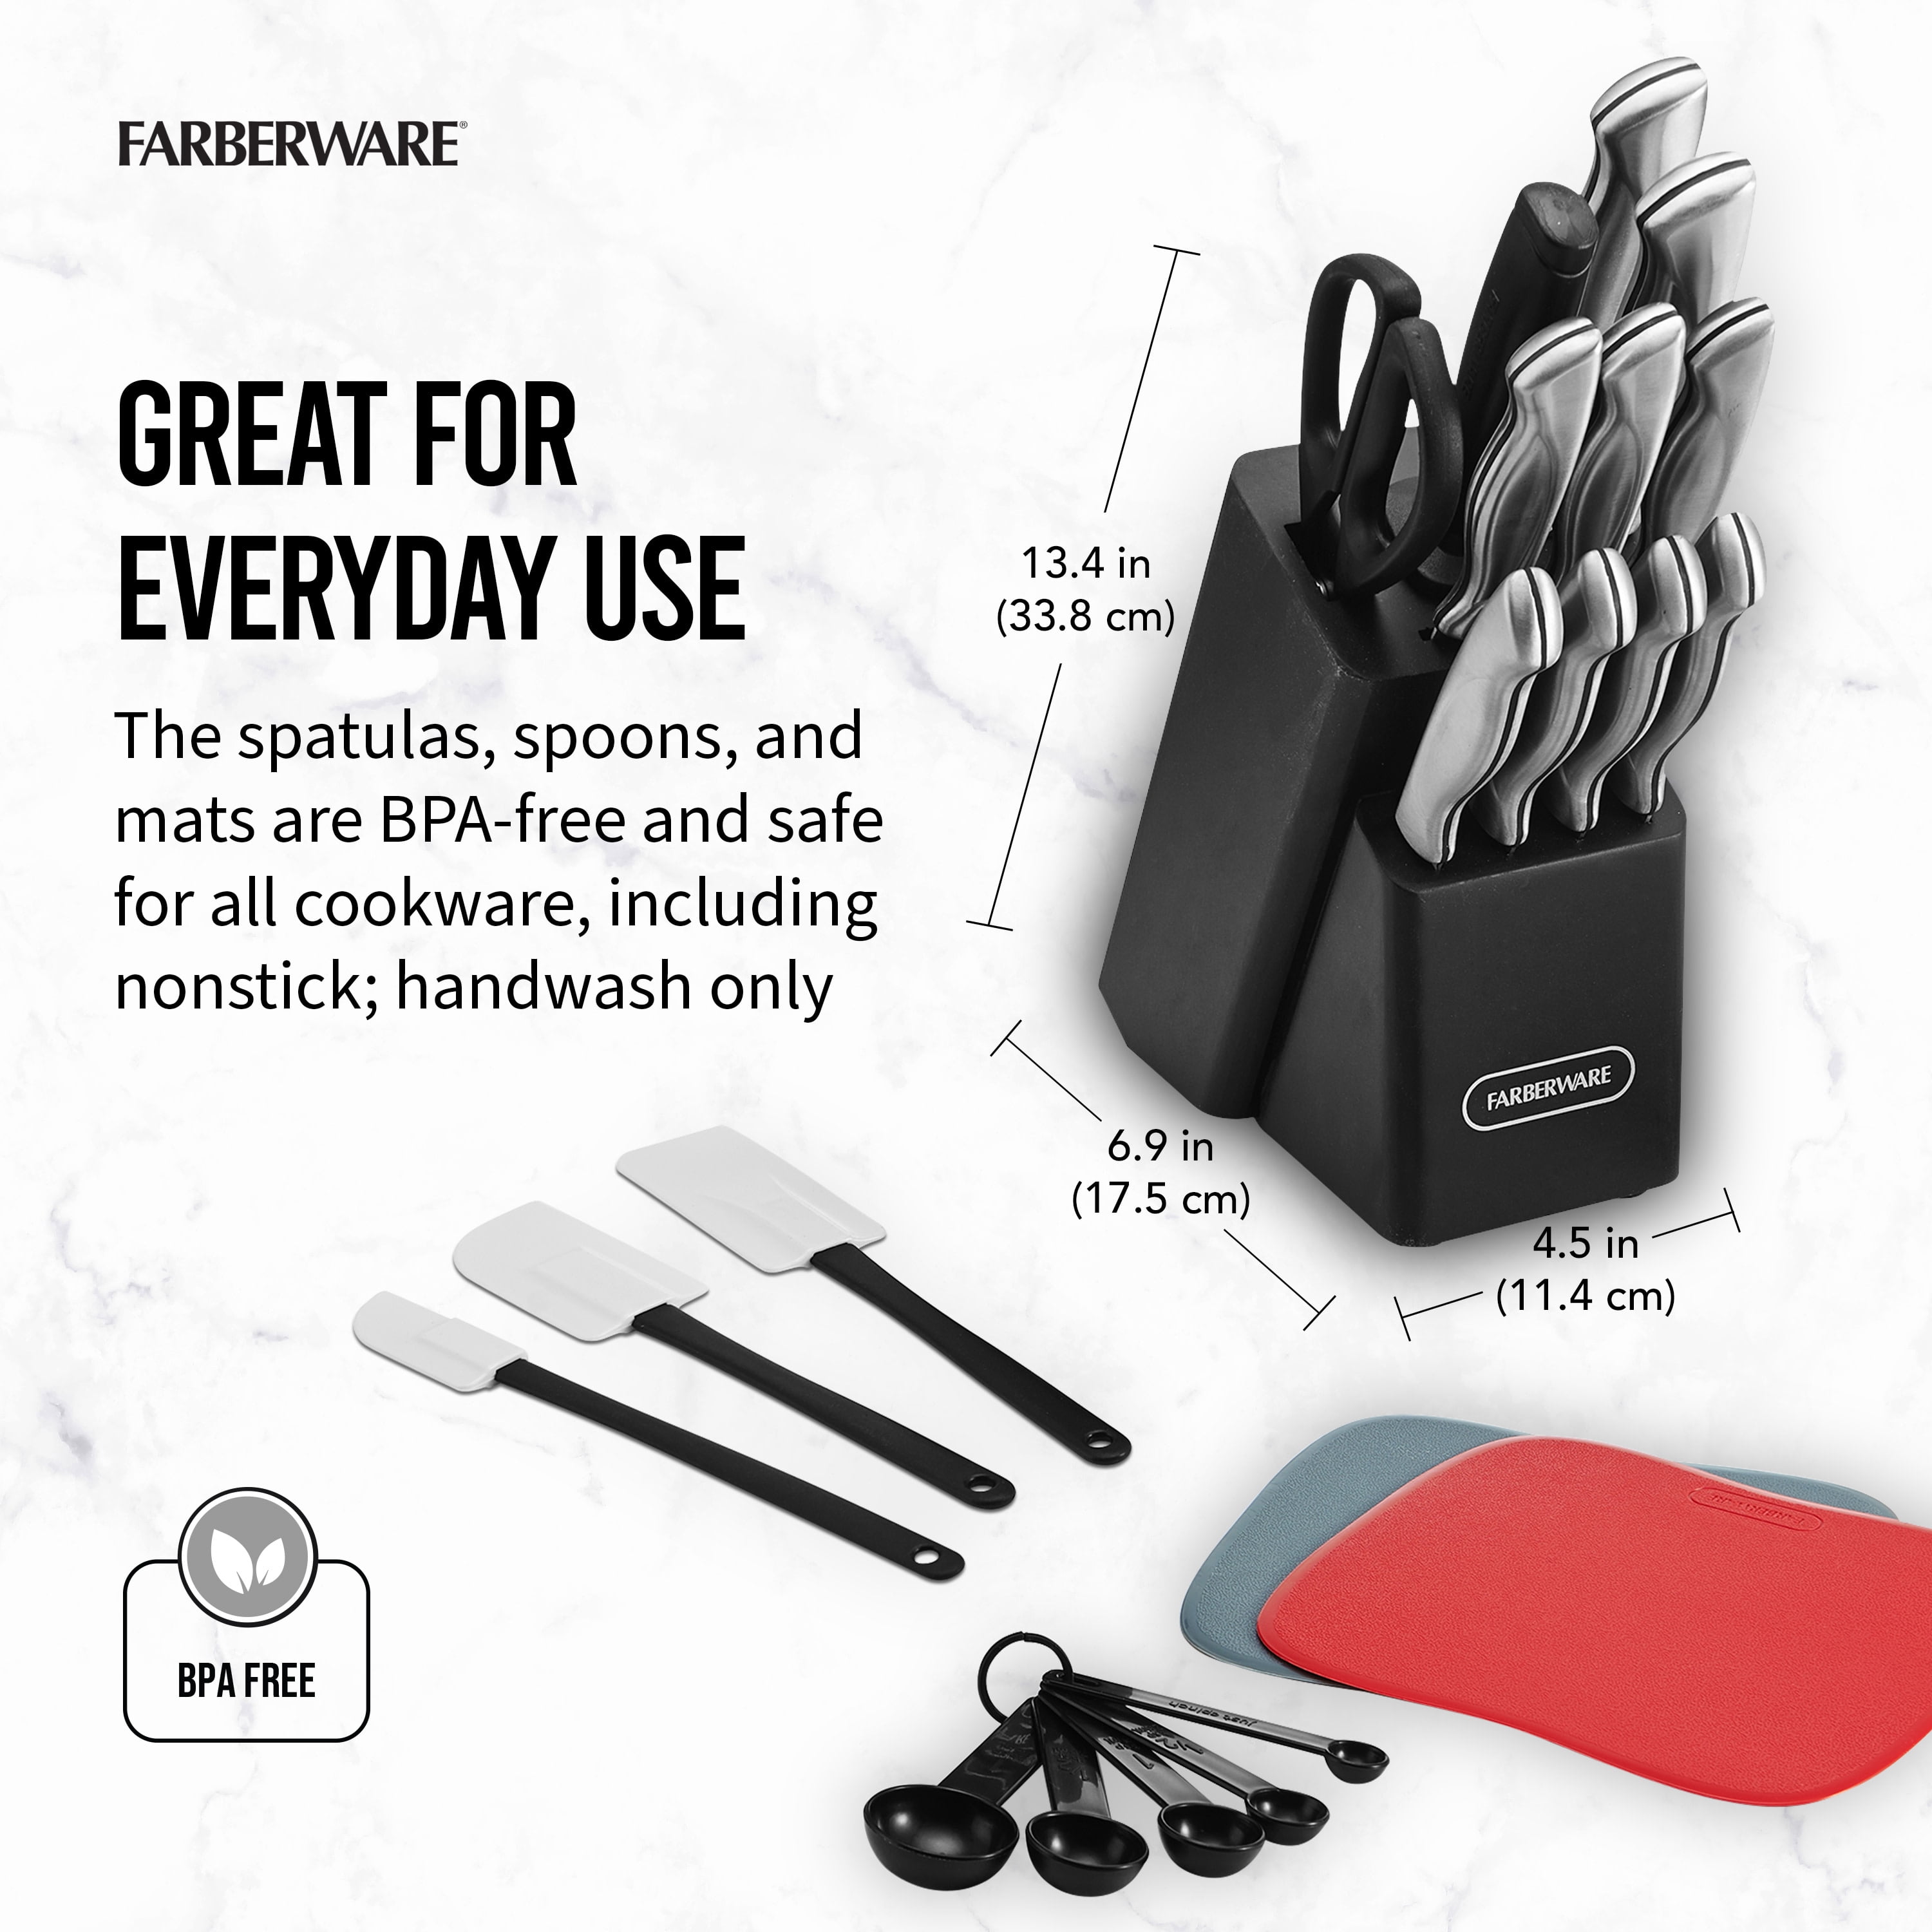 Farberware Classic 22-piece Stamped Stainless Steel Cutlery and Utensil Set - 3